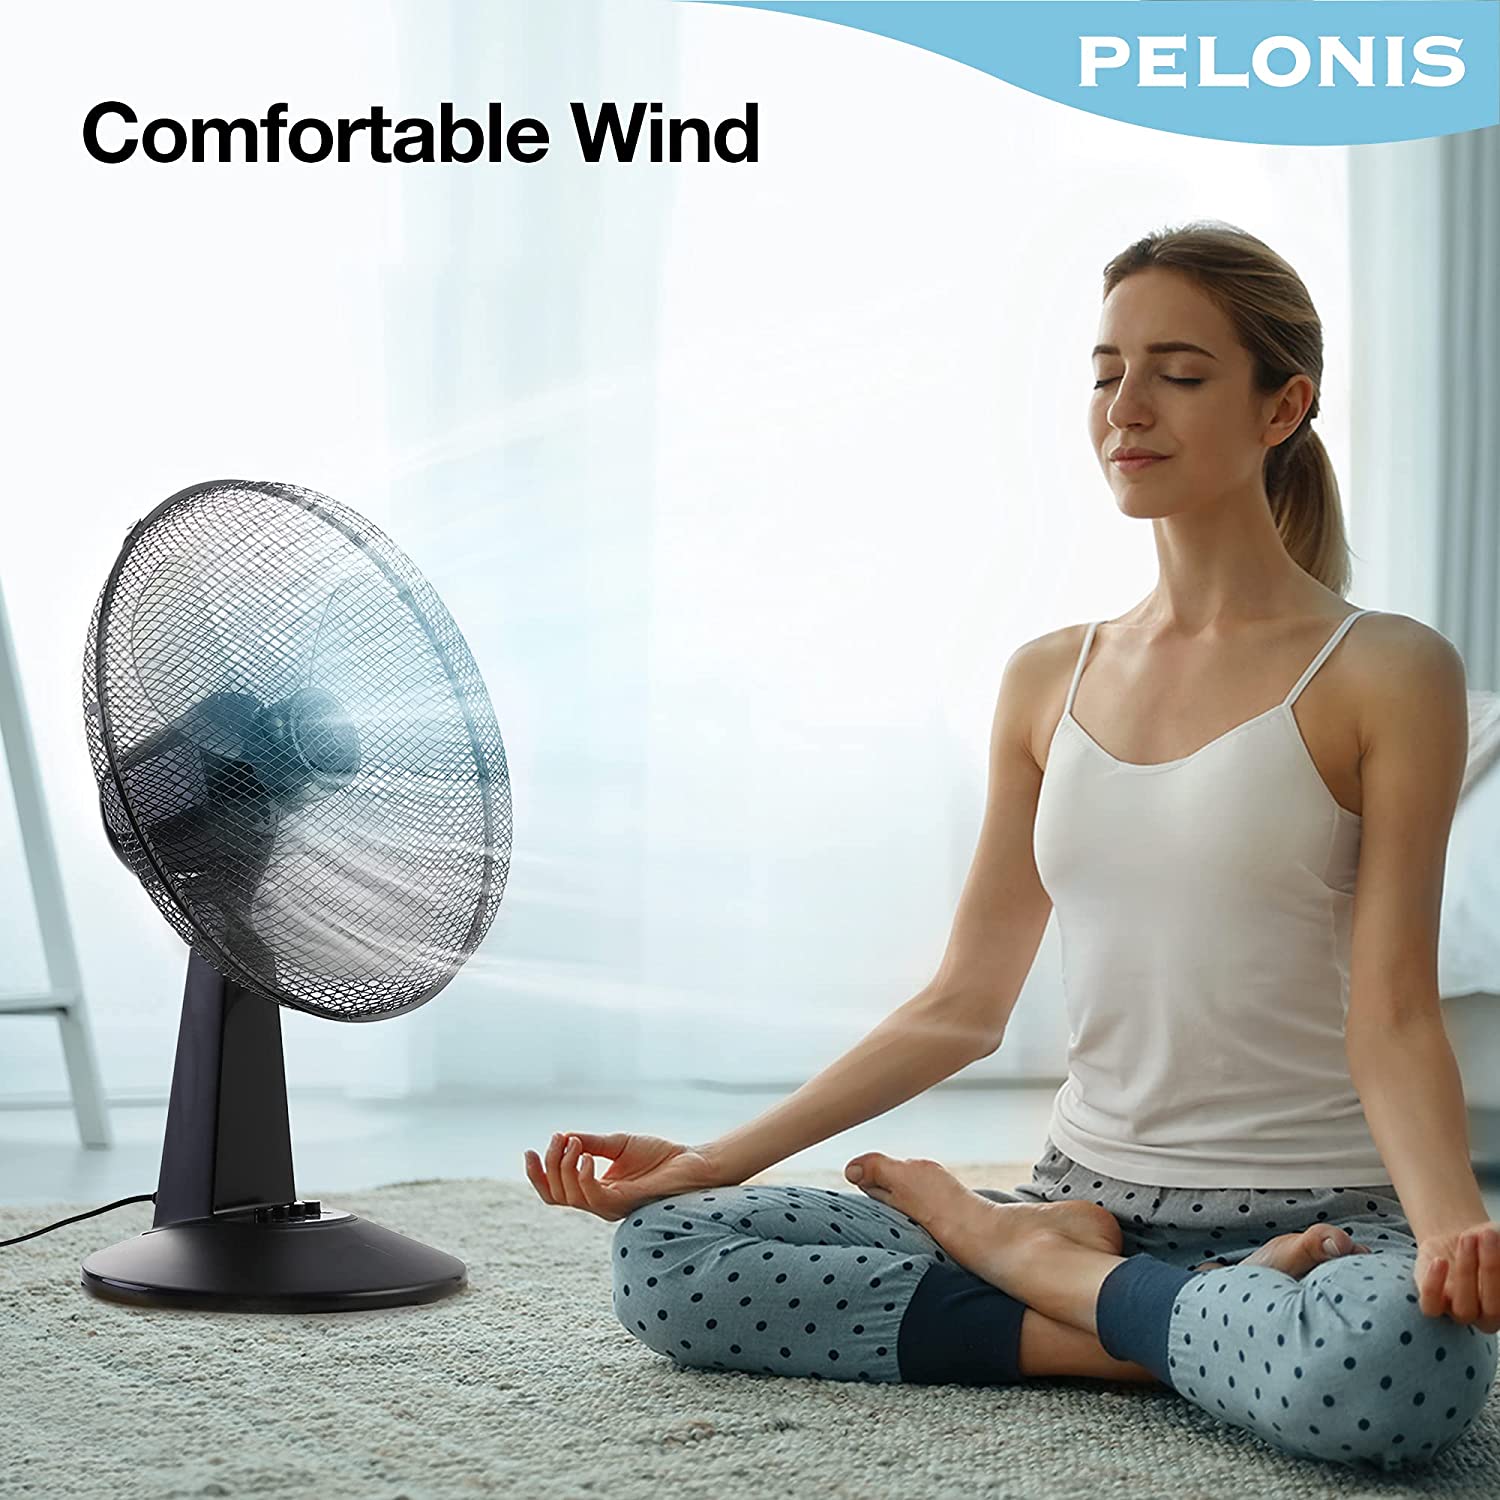 PELONIS Portable Desk Fan 14-inch / 35cm with 3 Speeds 85º Oscillation, 40W Electric Table Fan, Adjustable Head Low Noise, Strong Resistant Base for Bedroom...